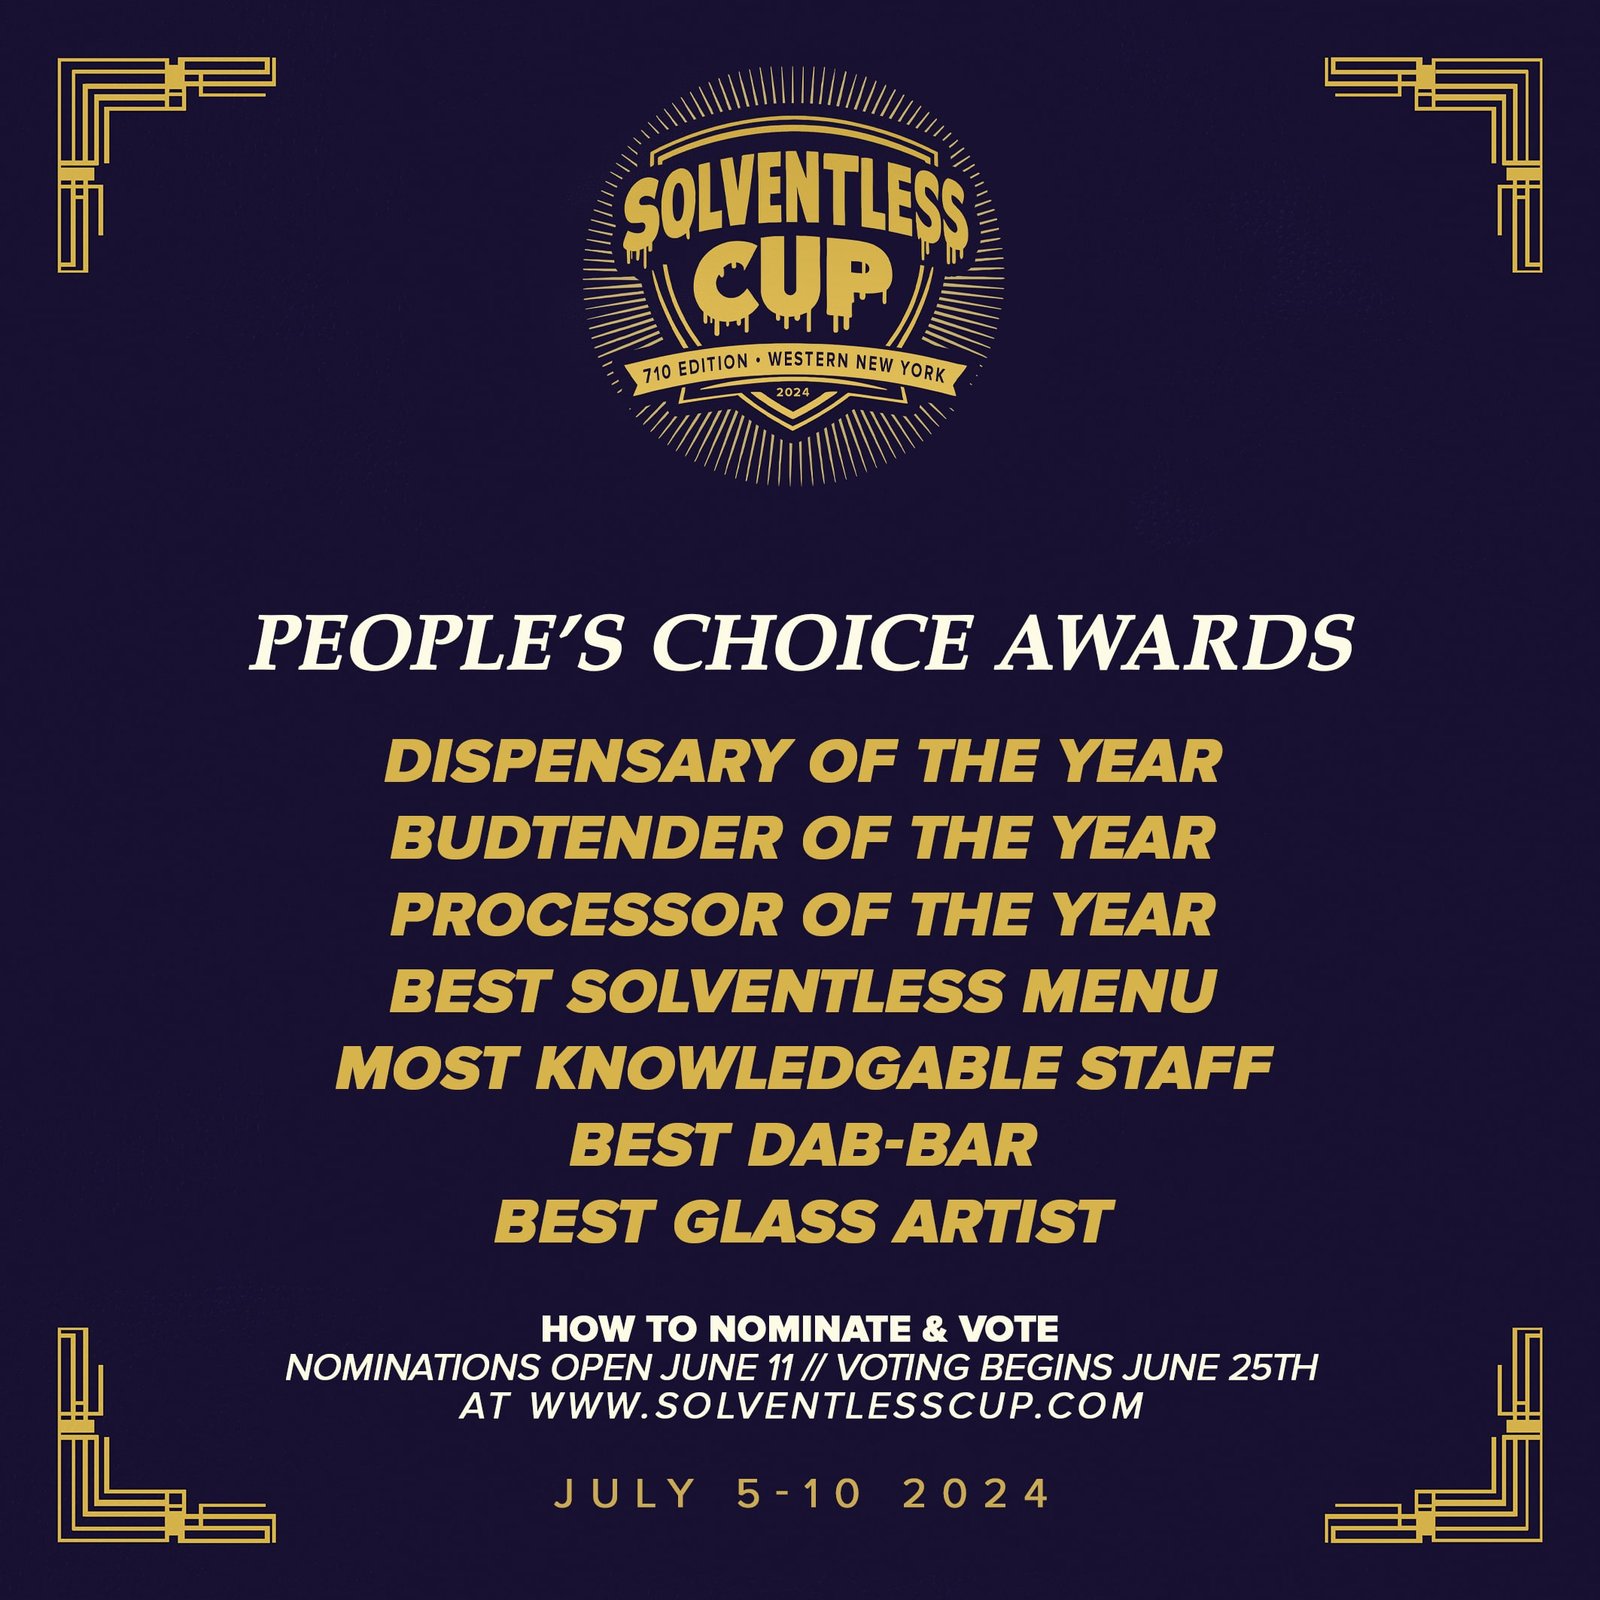 Solventless Cup people's choice awards categories